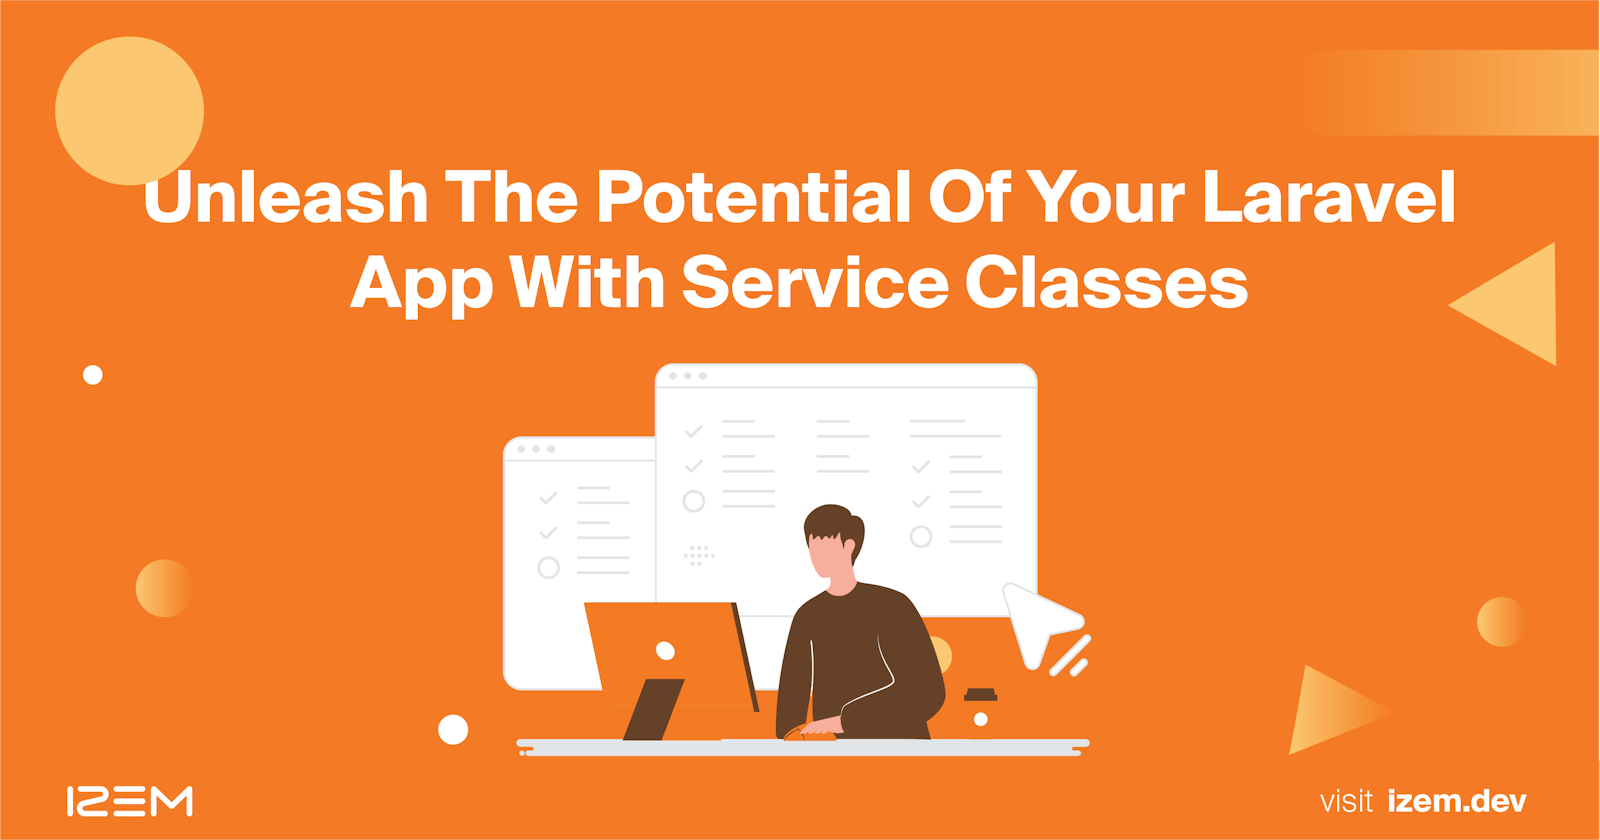 Unleash the Potential of Your Laravel App with Service Classes